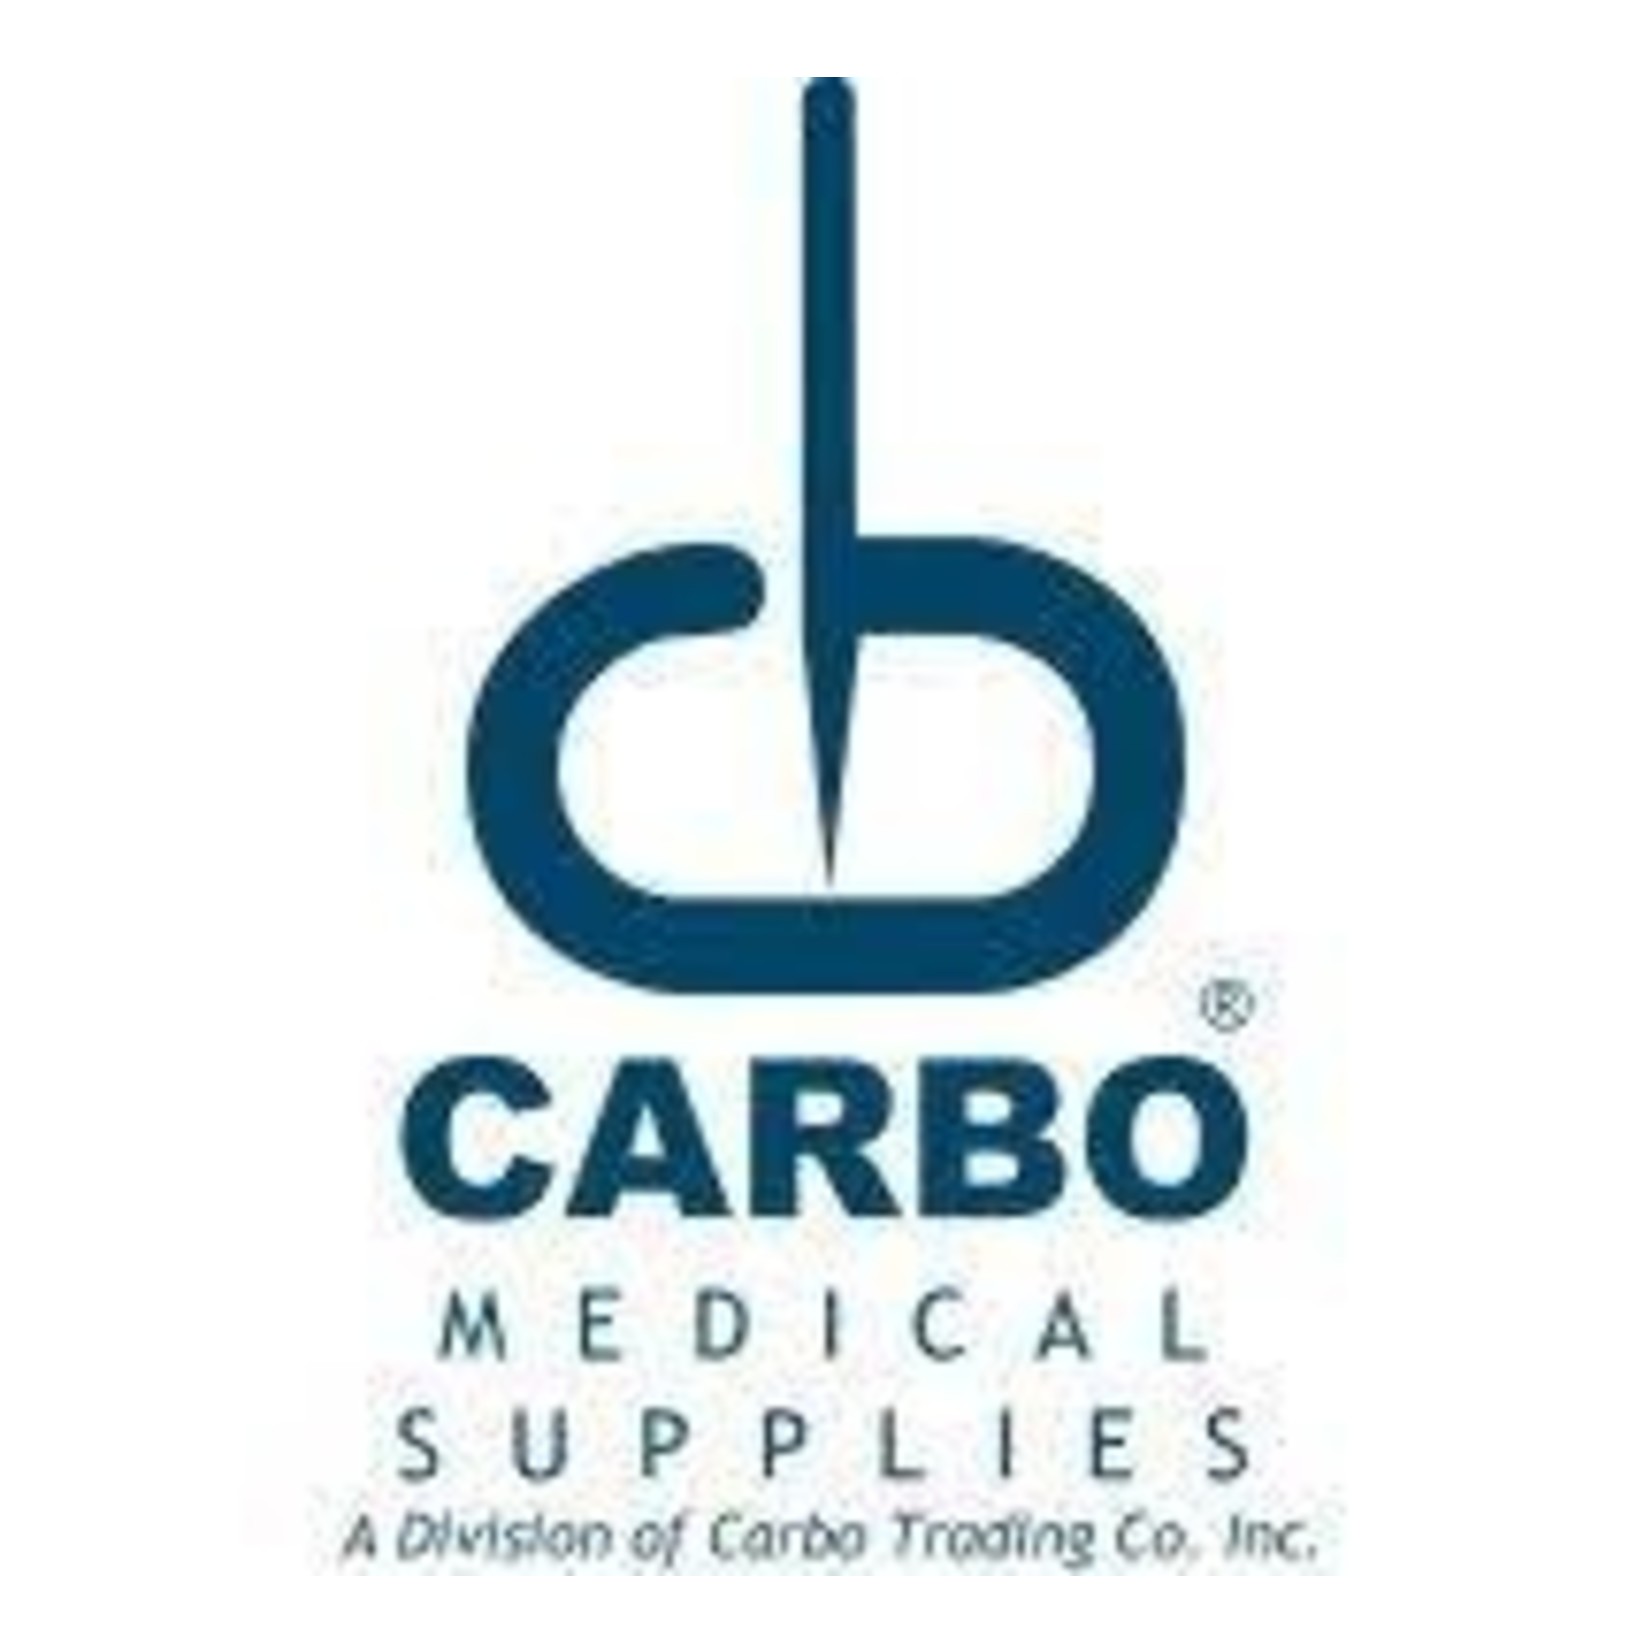 CARBO CARBO INTRADERMAL NEEDLE .14 x 6mm 100 PACK